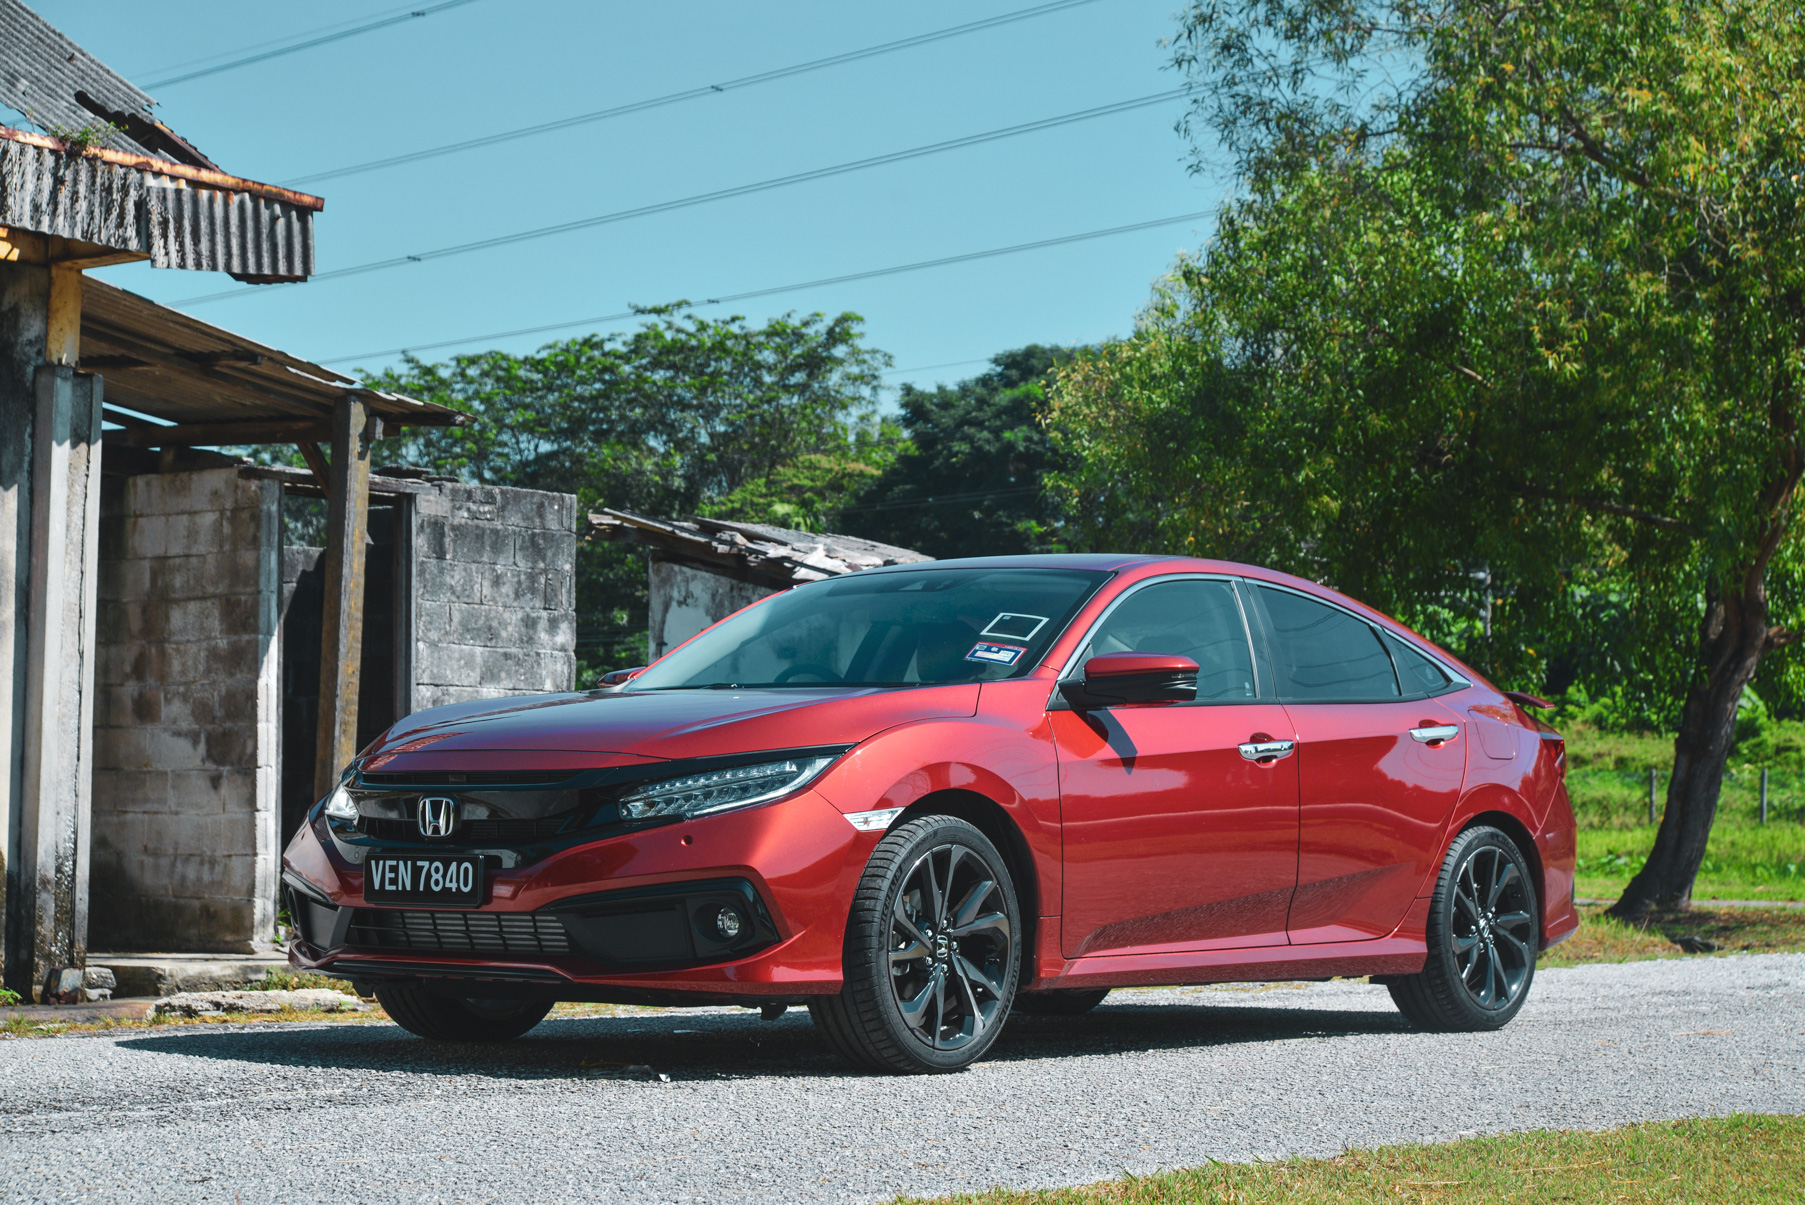 2020 Honda Civic Turbo review: an improved crowd pleaser